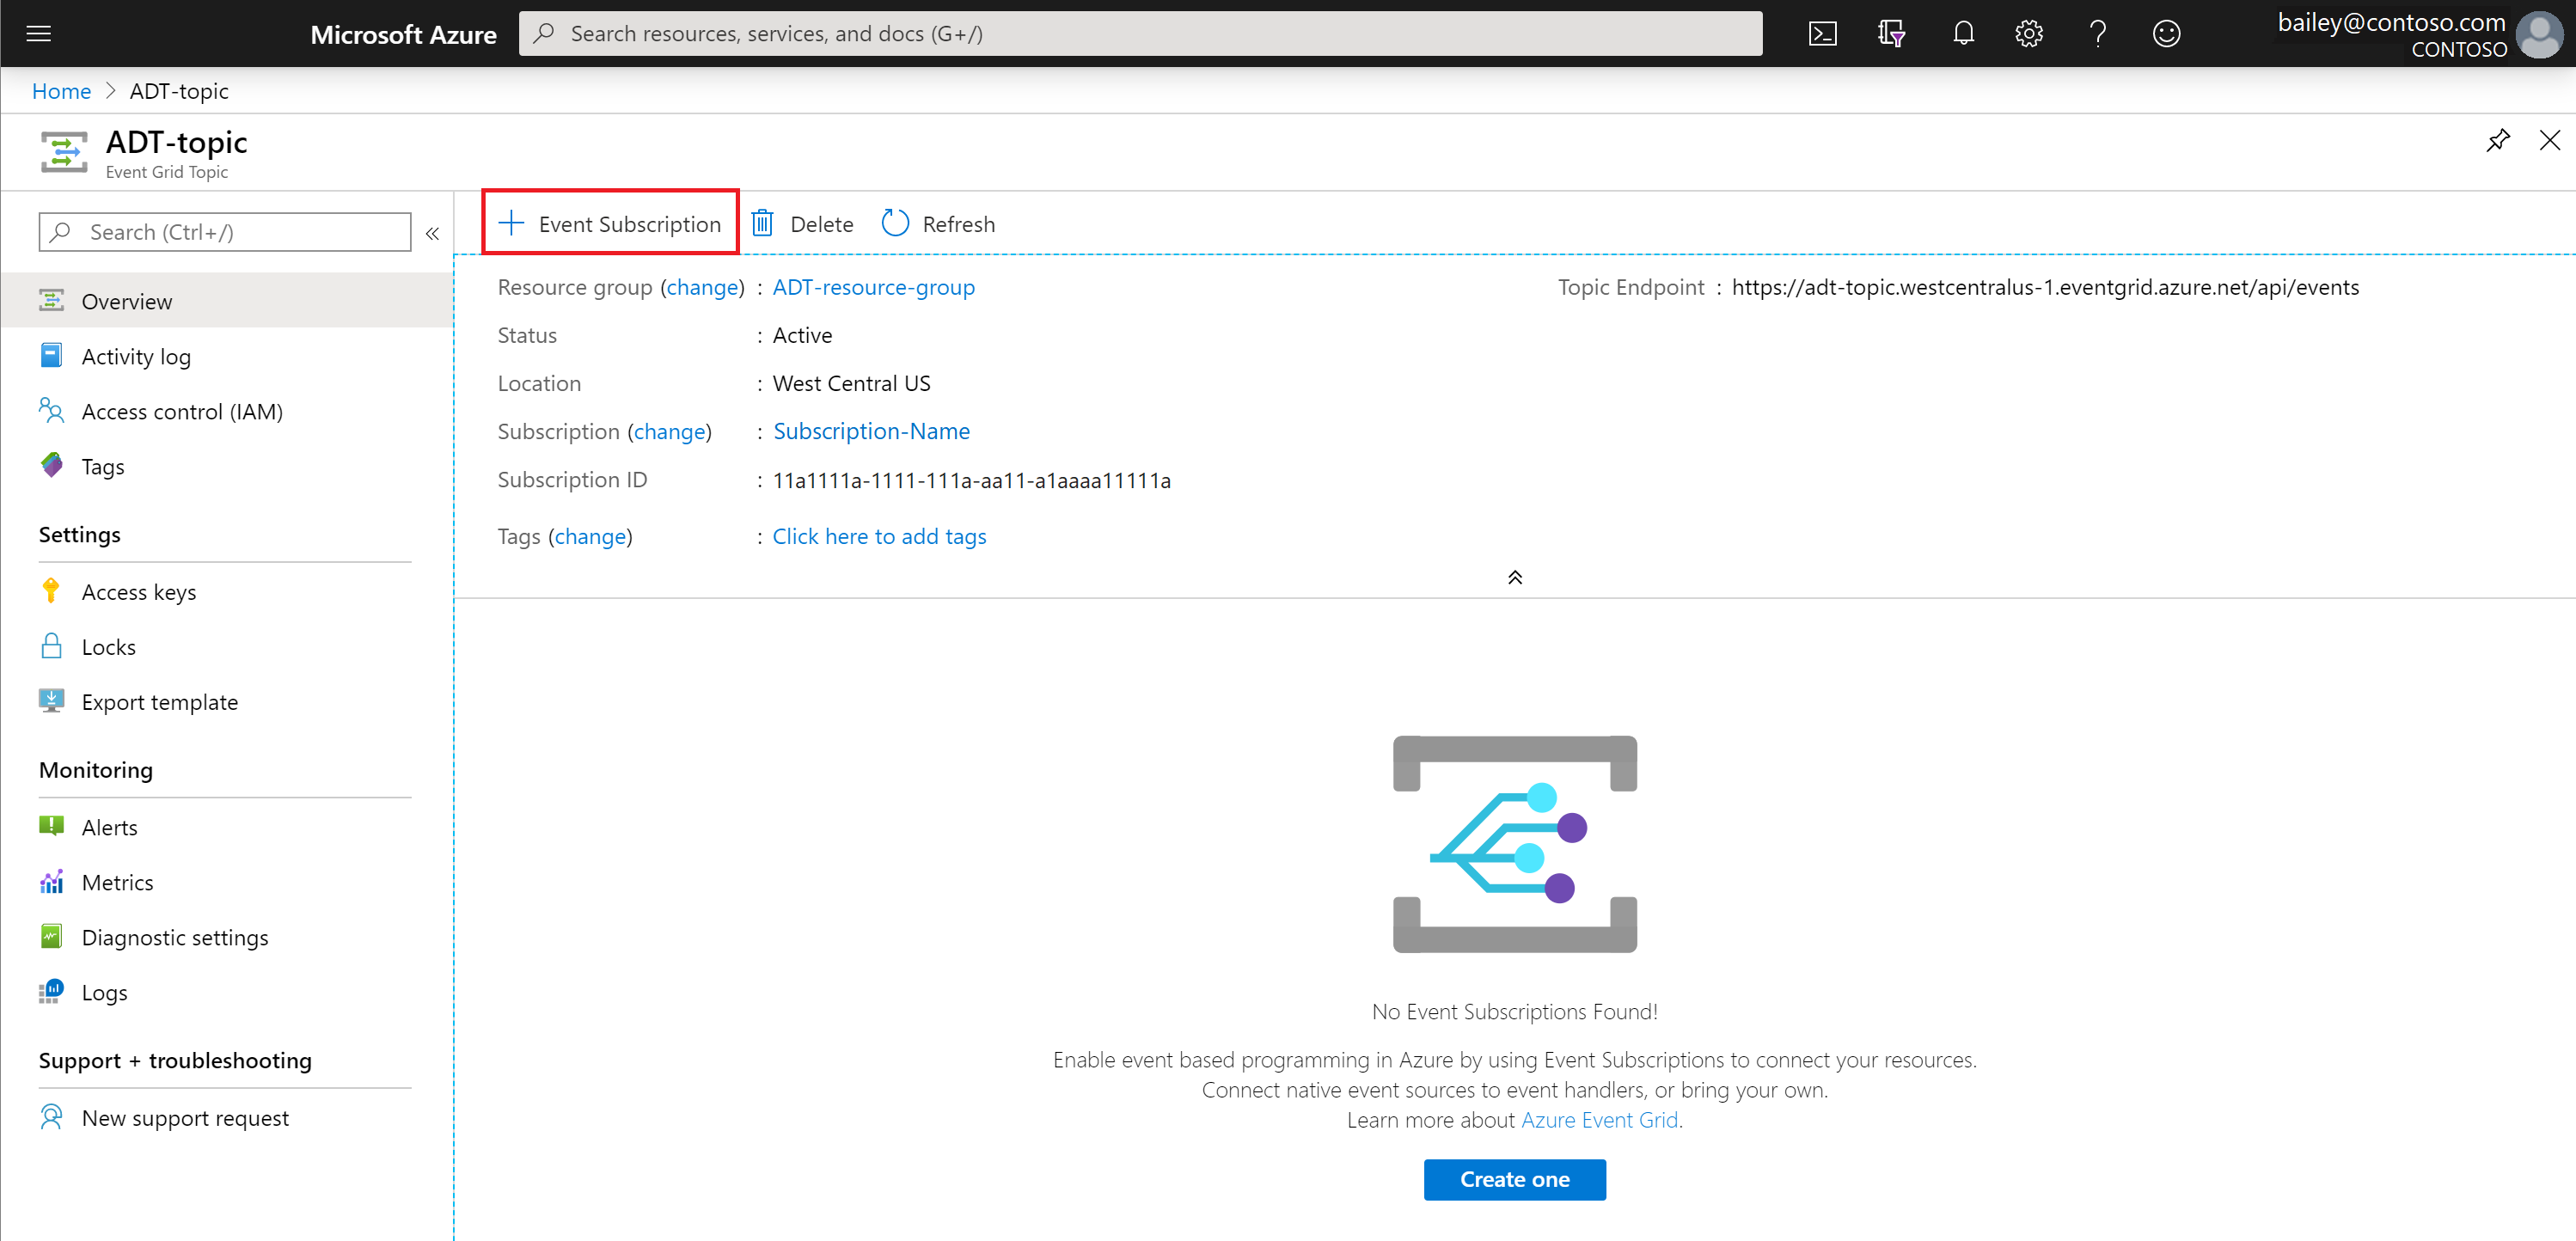 Screenshot of how to create an event subscription in the Azure portal.